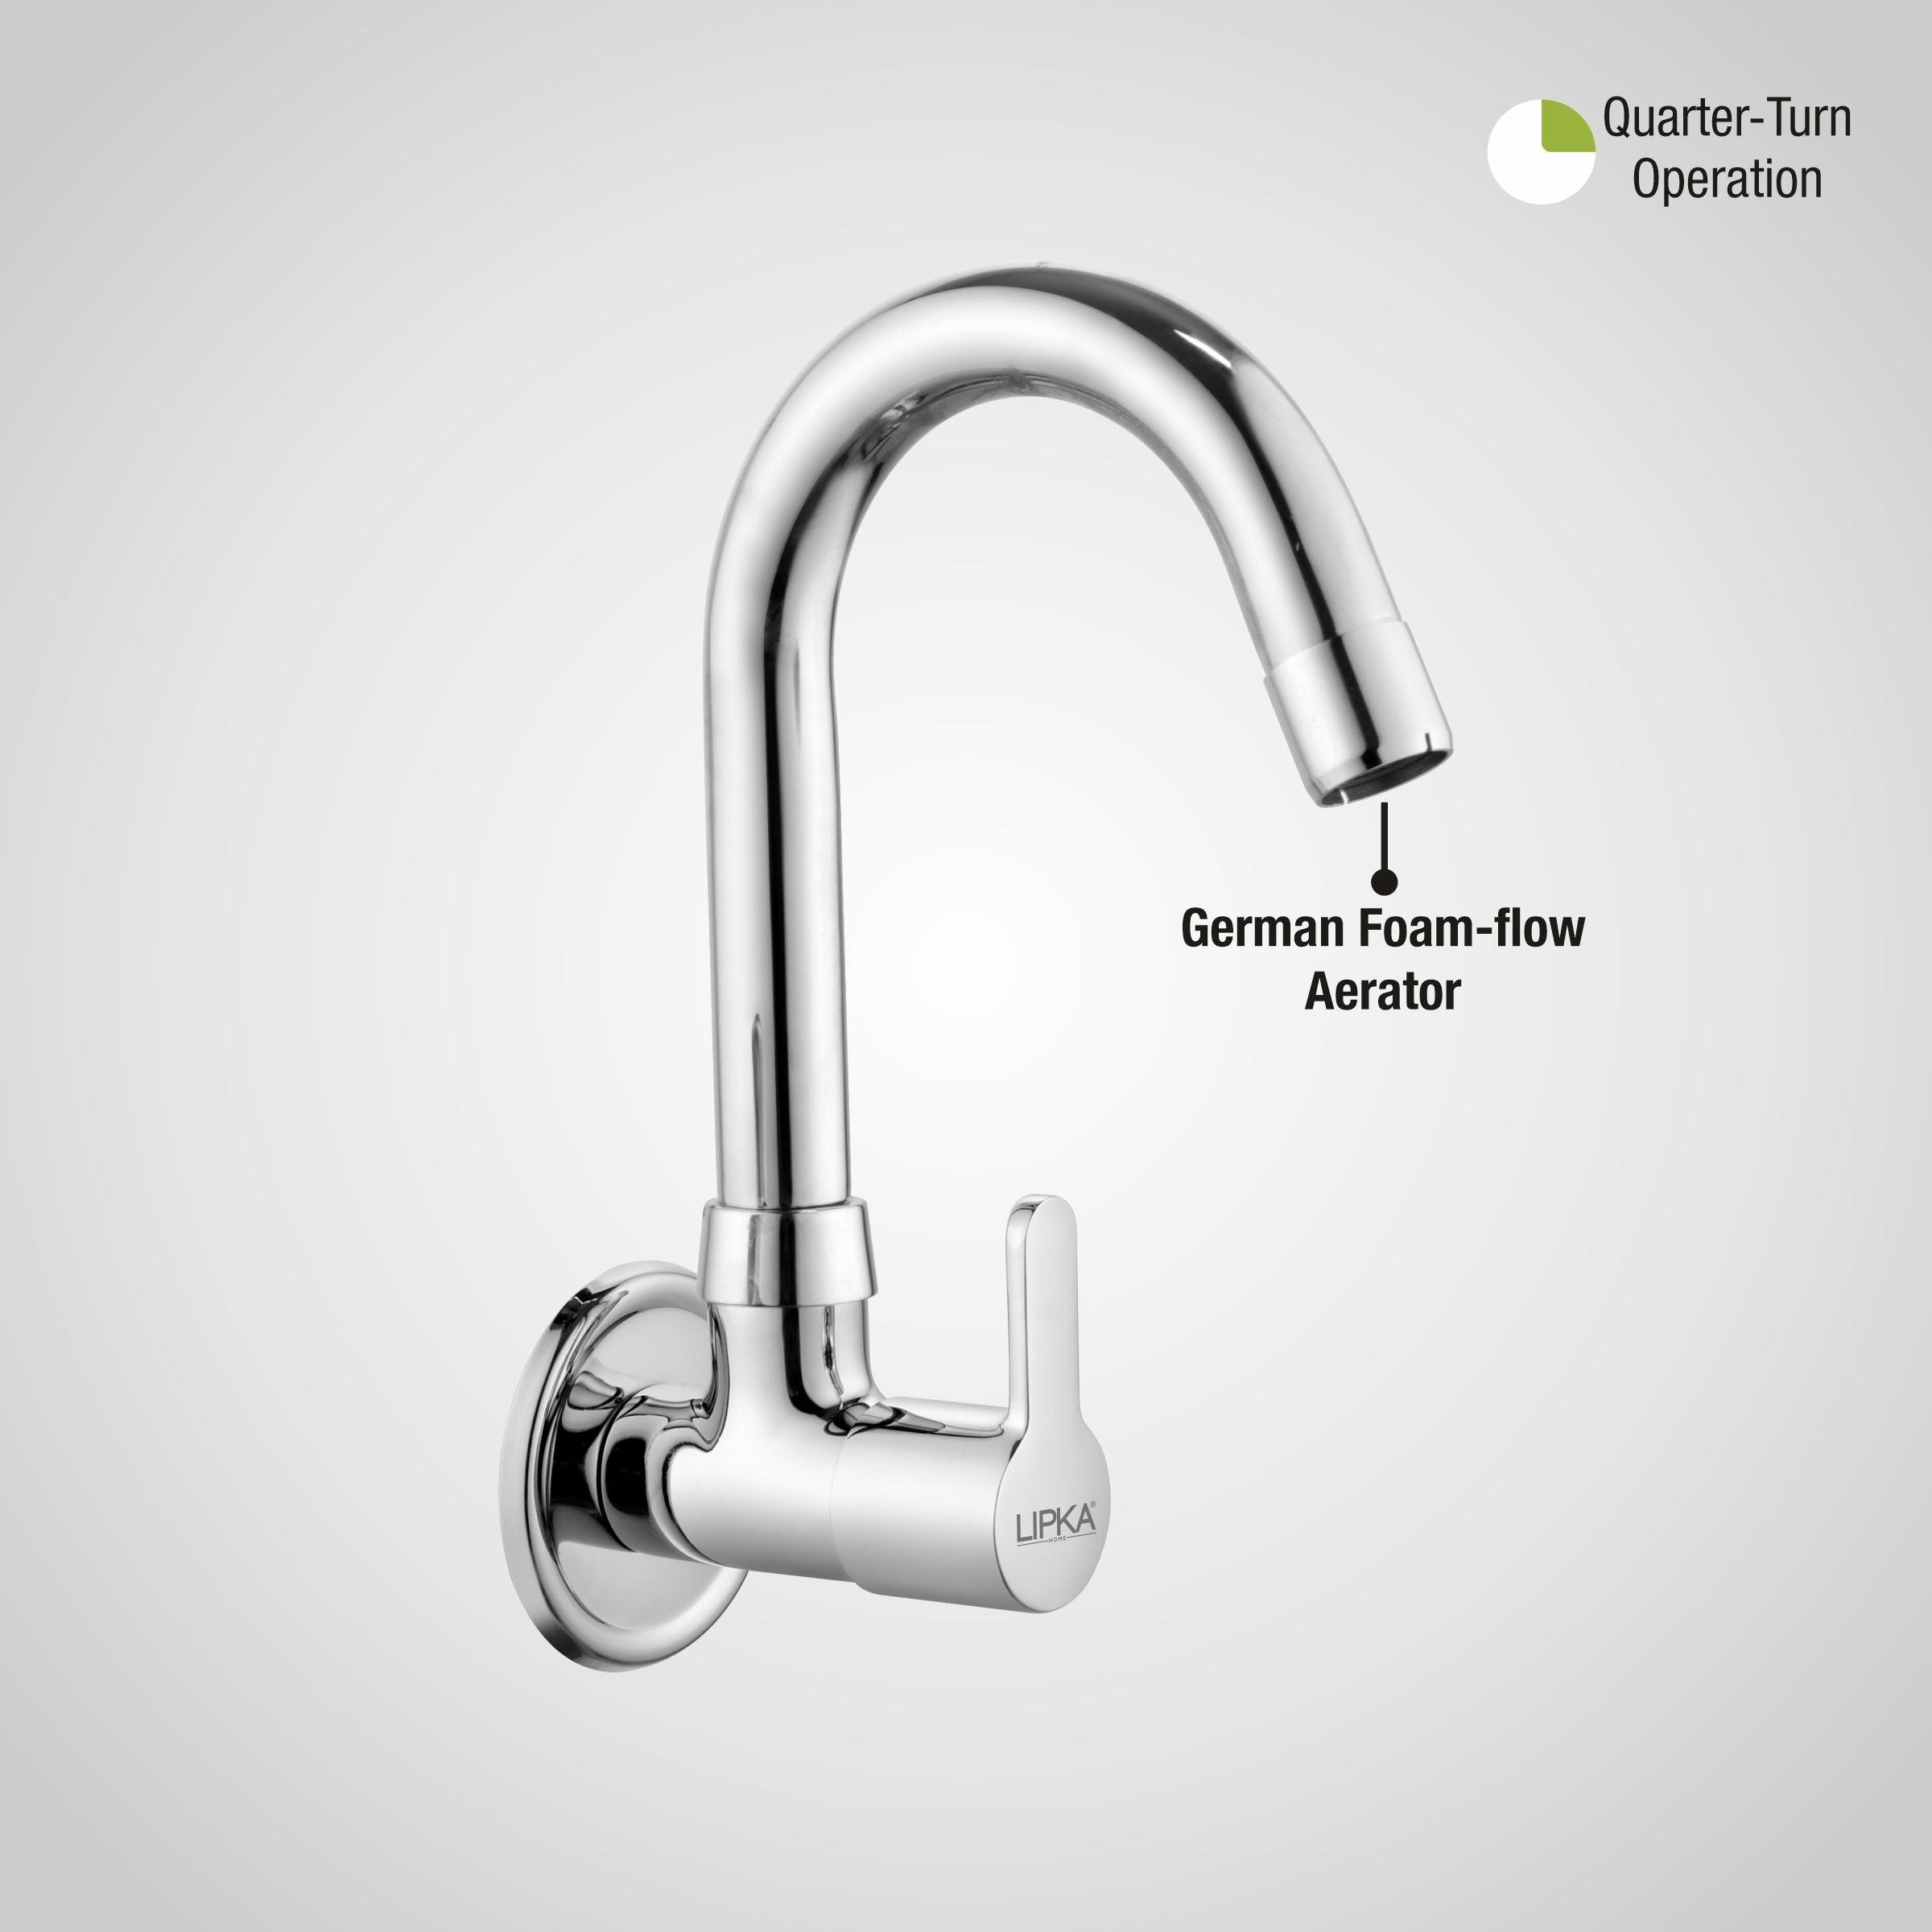 Fusion Sink Tap Brass Faucet with Round Swivel Spout (12 Inches) - LIPKA - Lipka Home